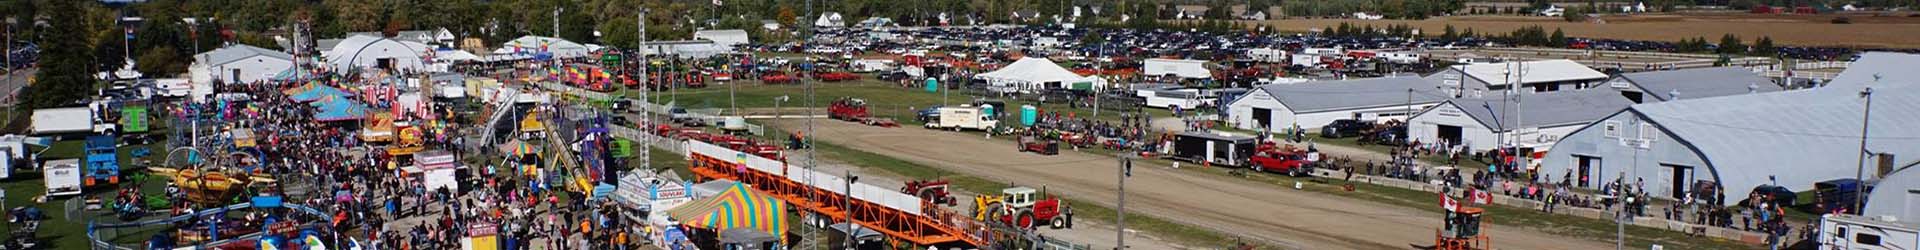 Cancelled — 2021 Tractor Pull